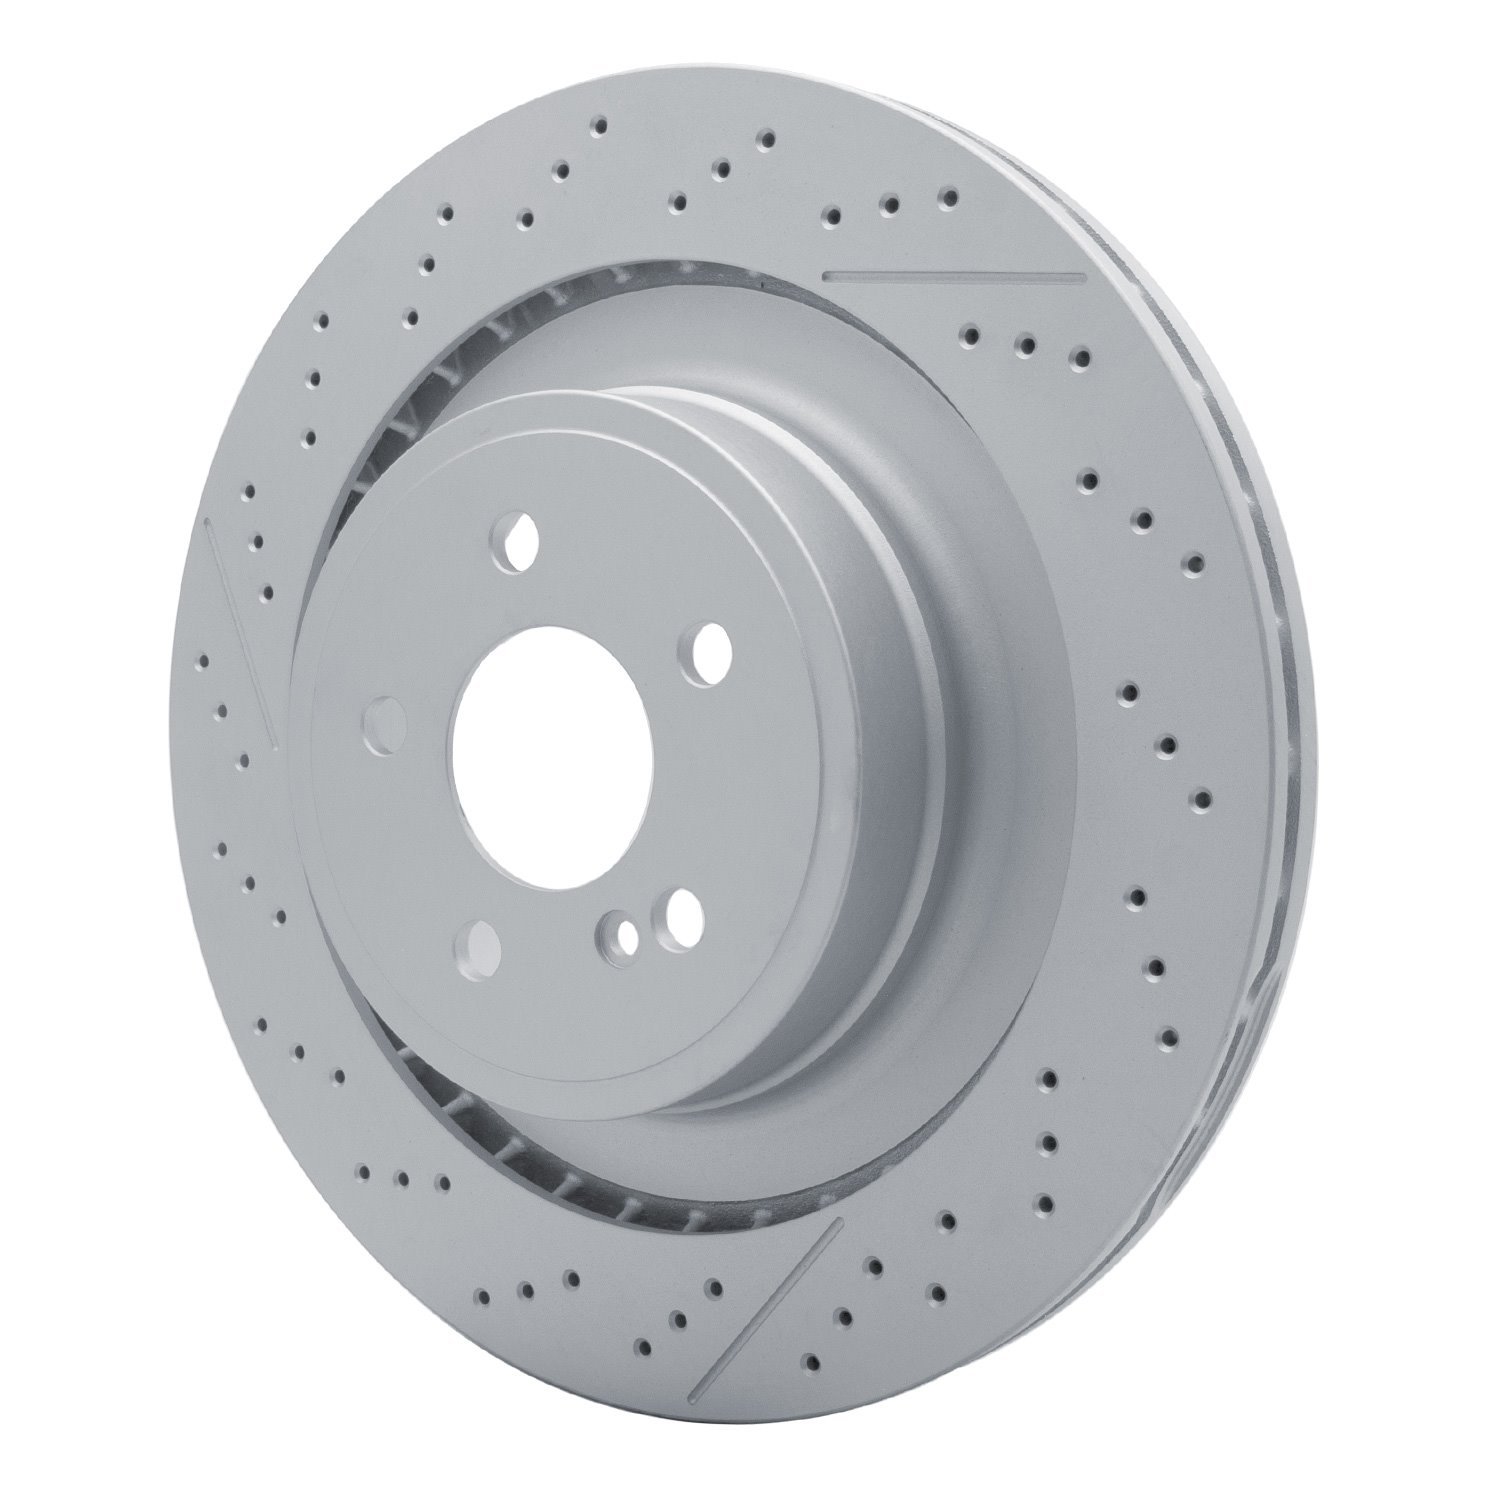 Hi-Carbon Alloy Geomet-Coated Drilled & Slotted Rotor,